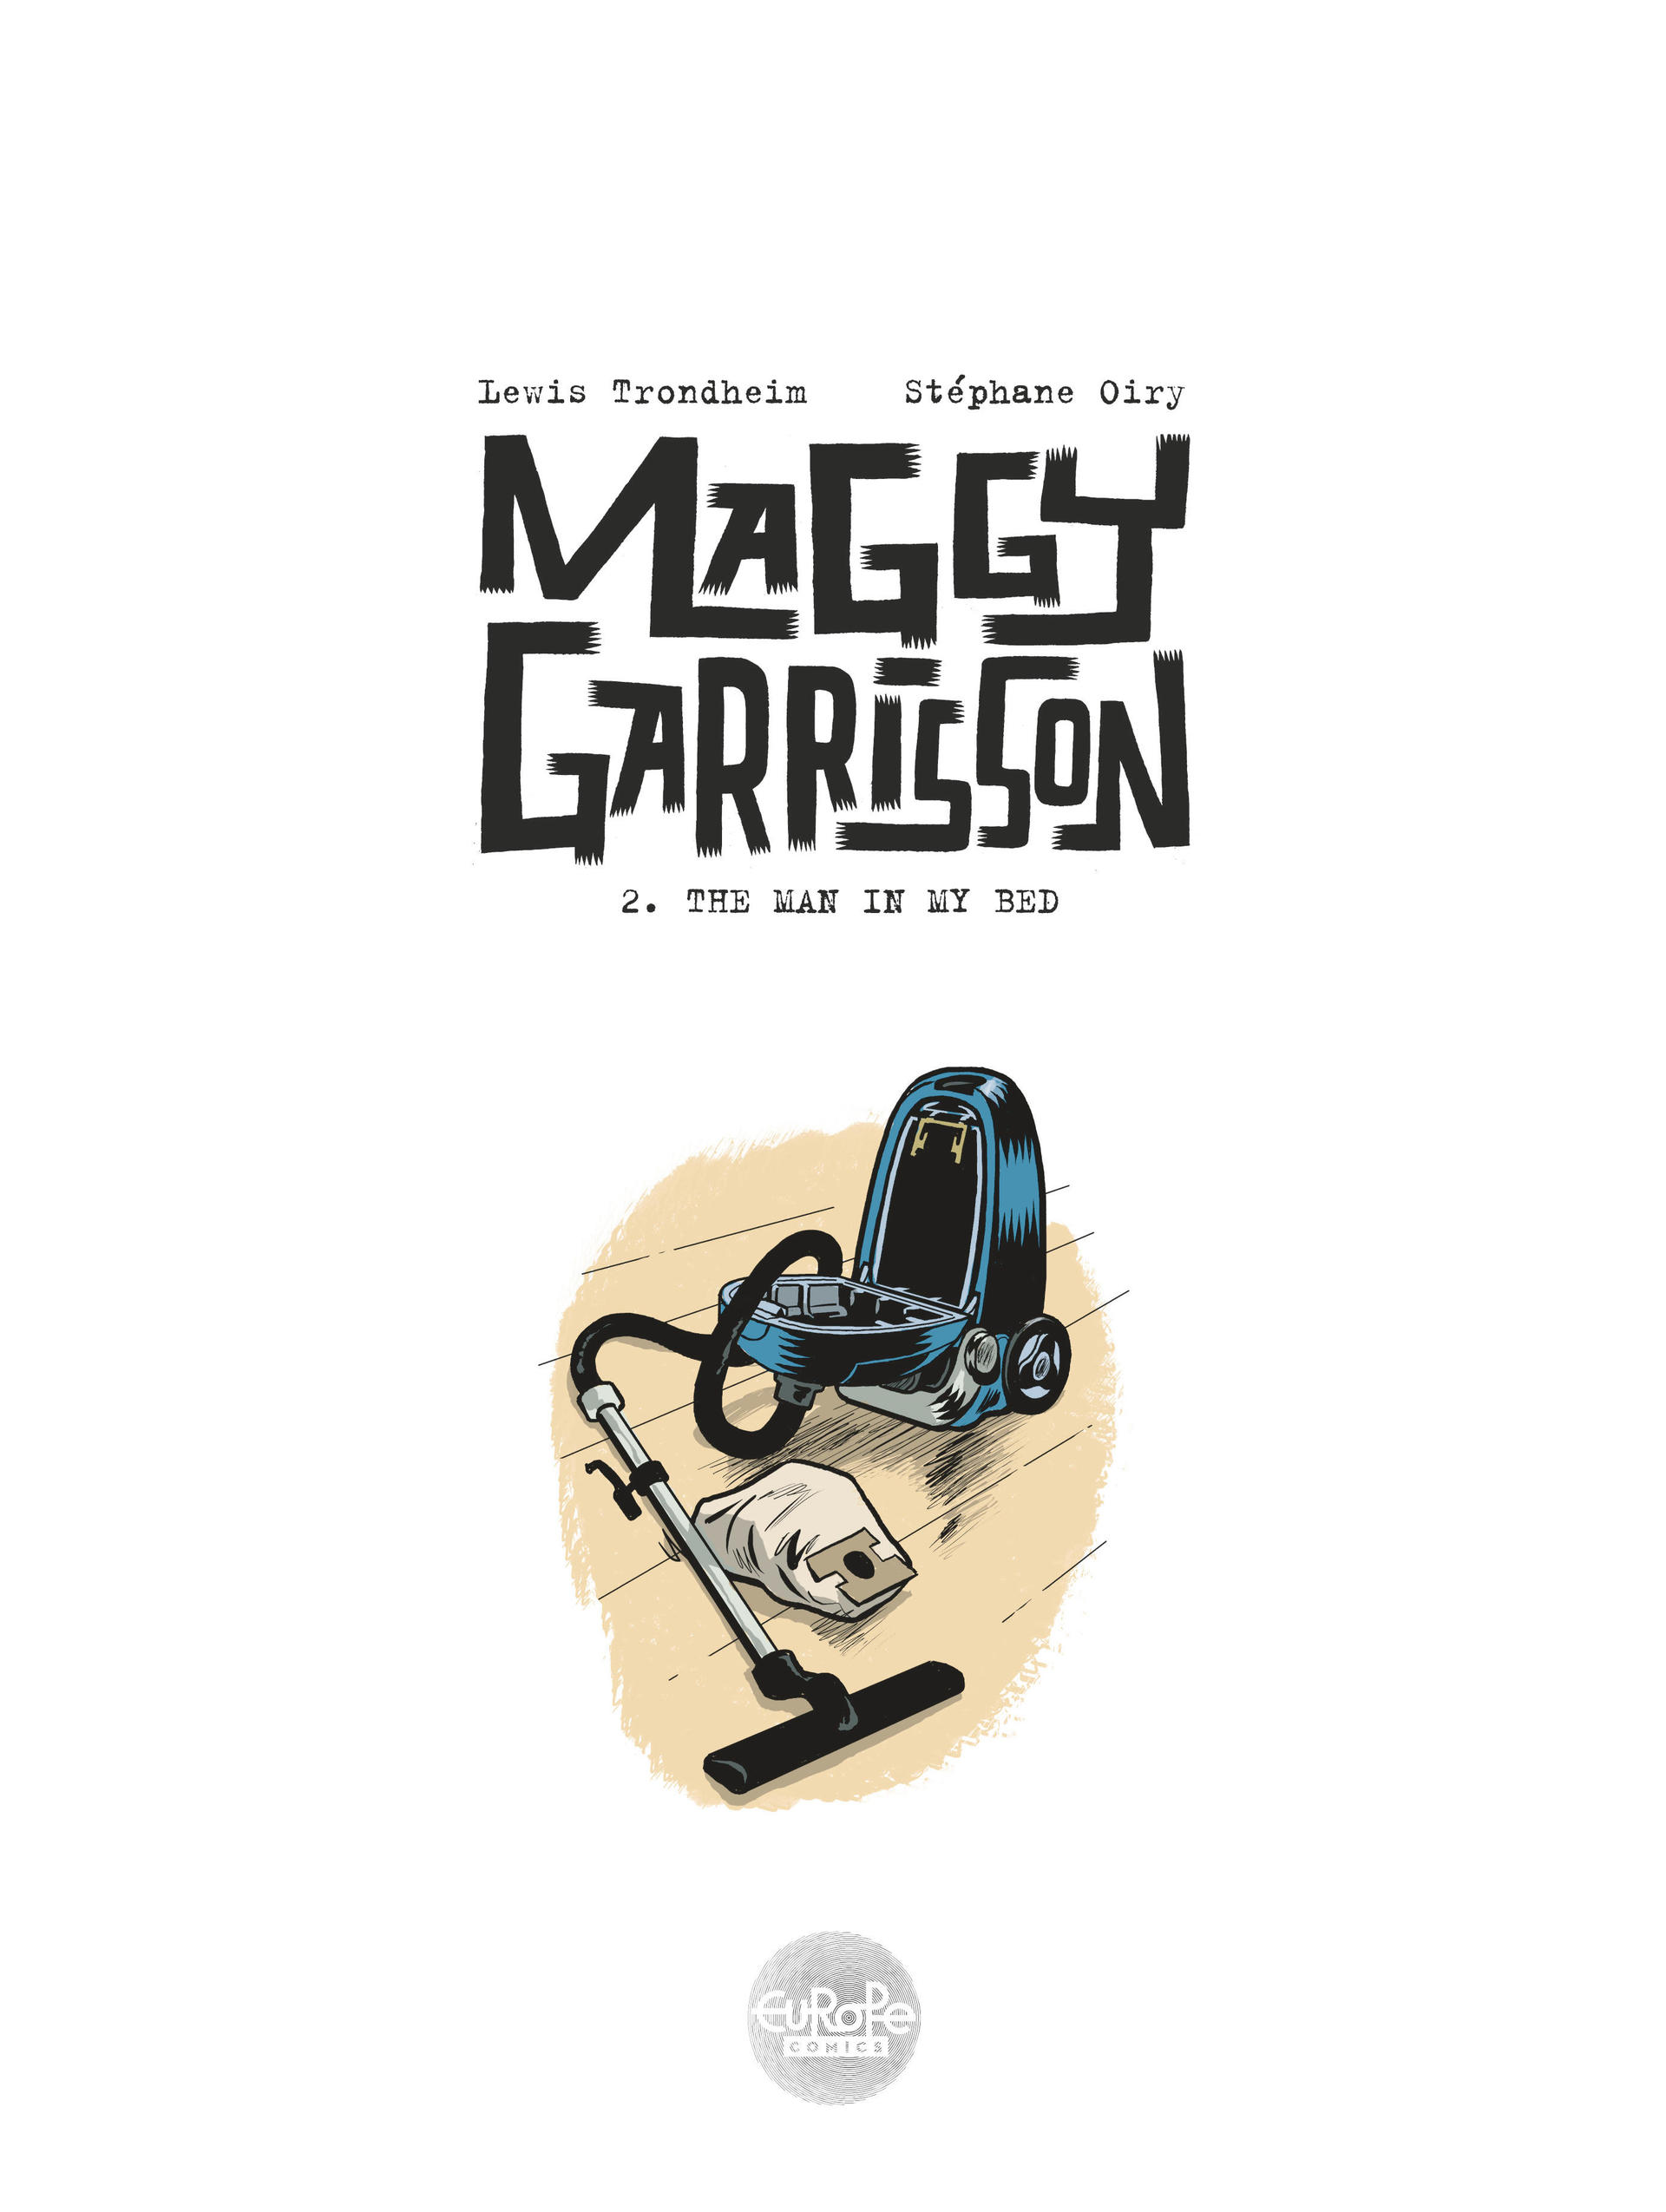 Read online Maggy Garrisson comic -  Issue #2 - 2